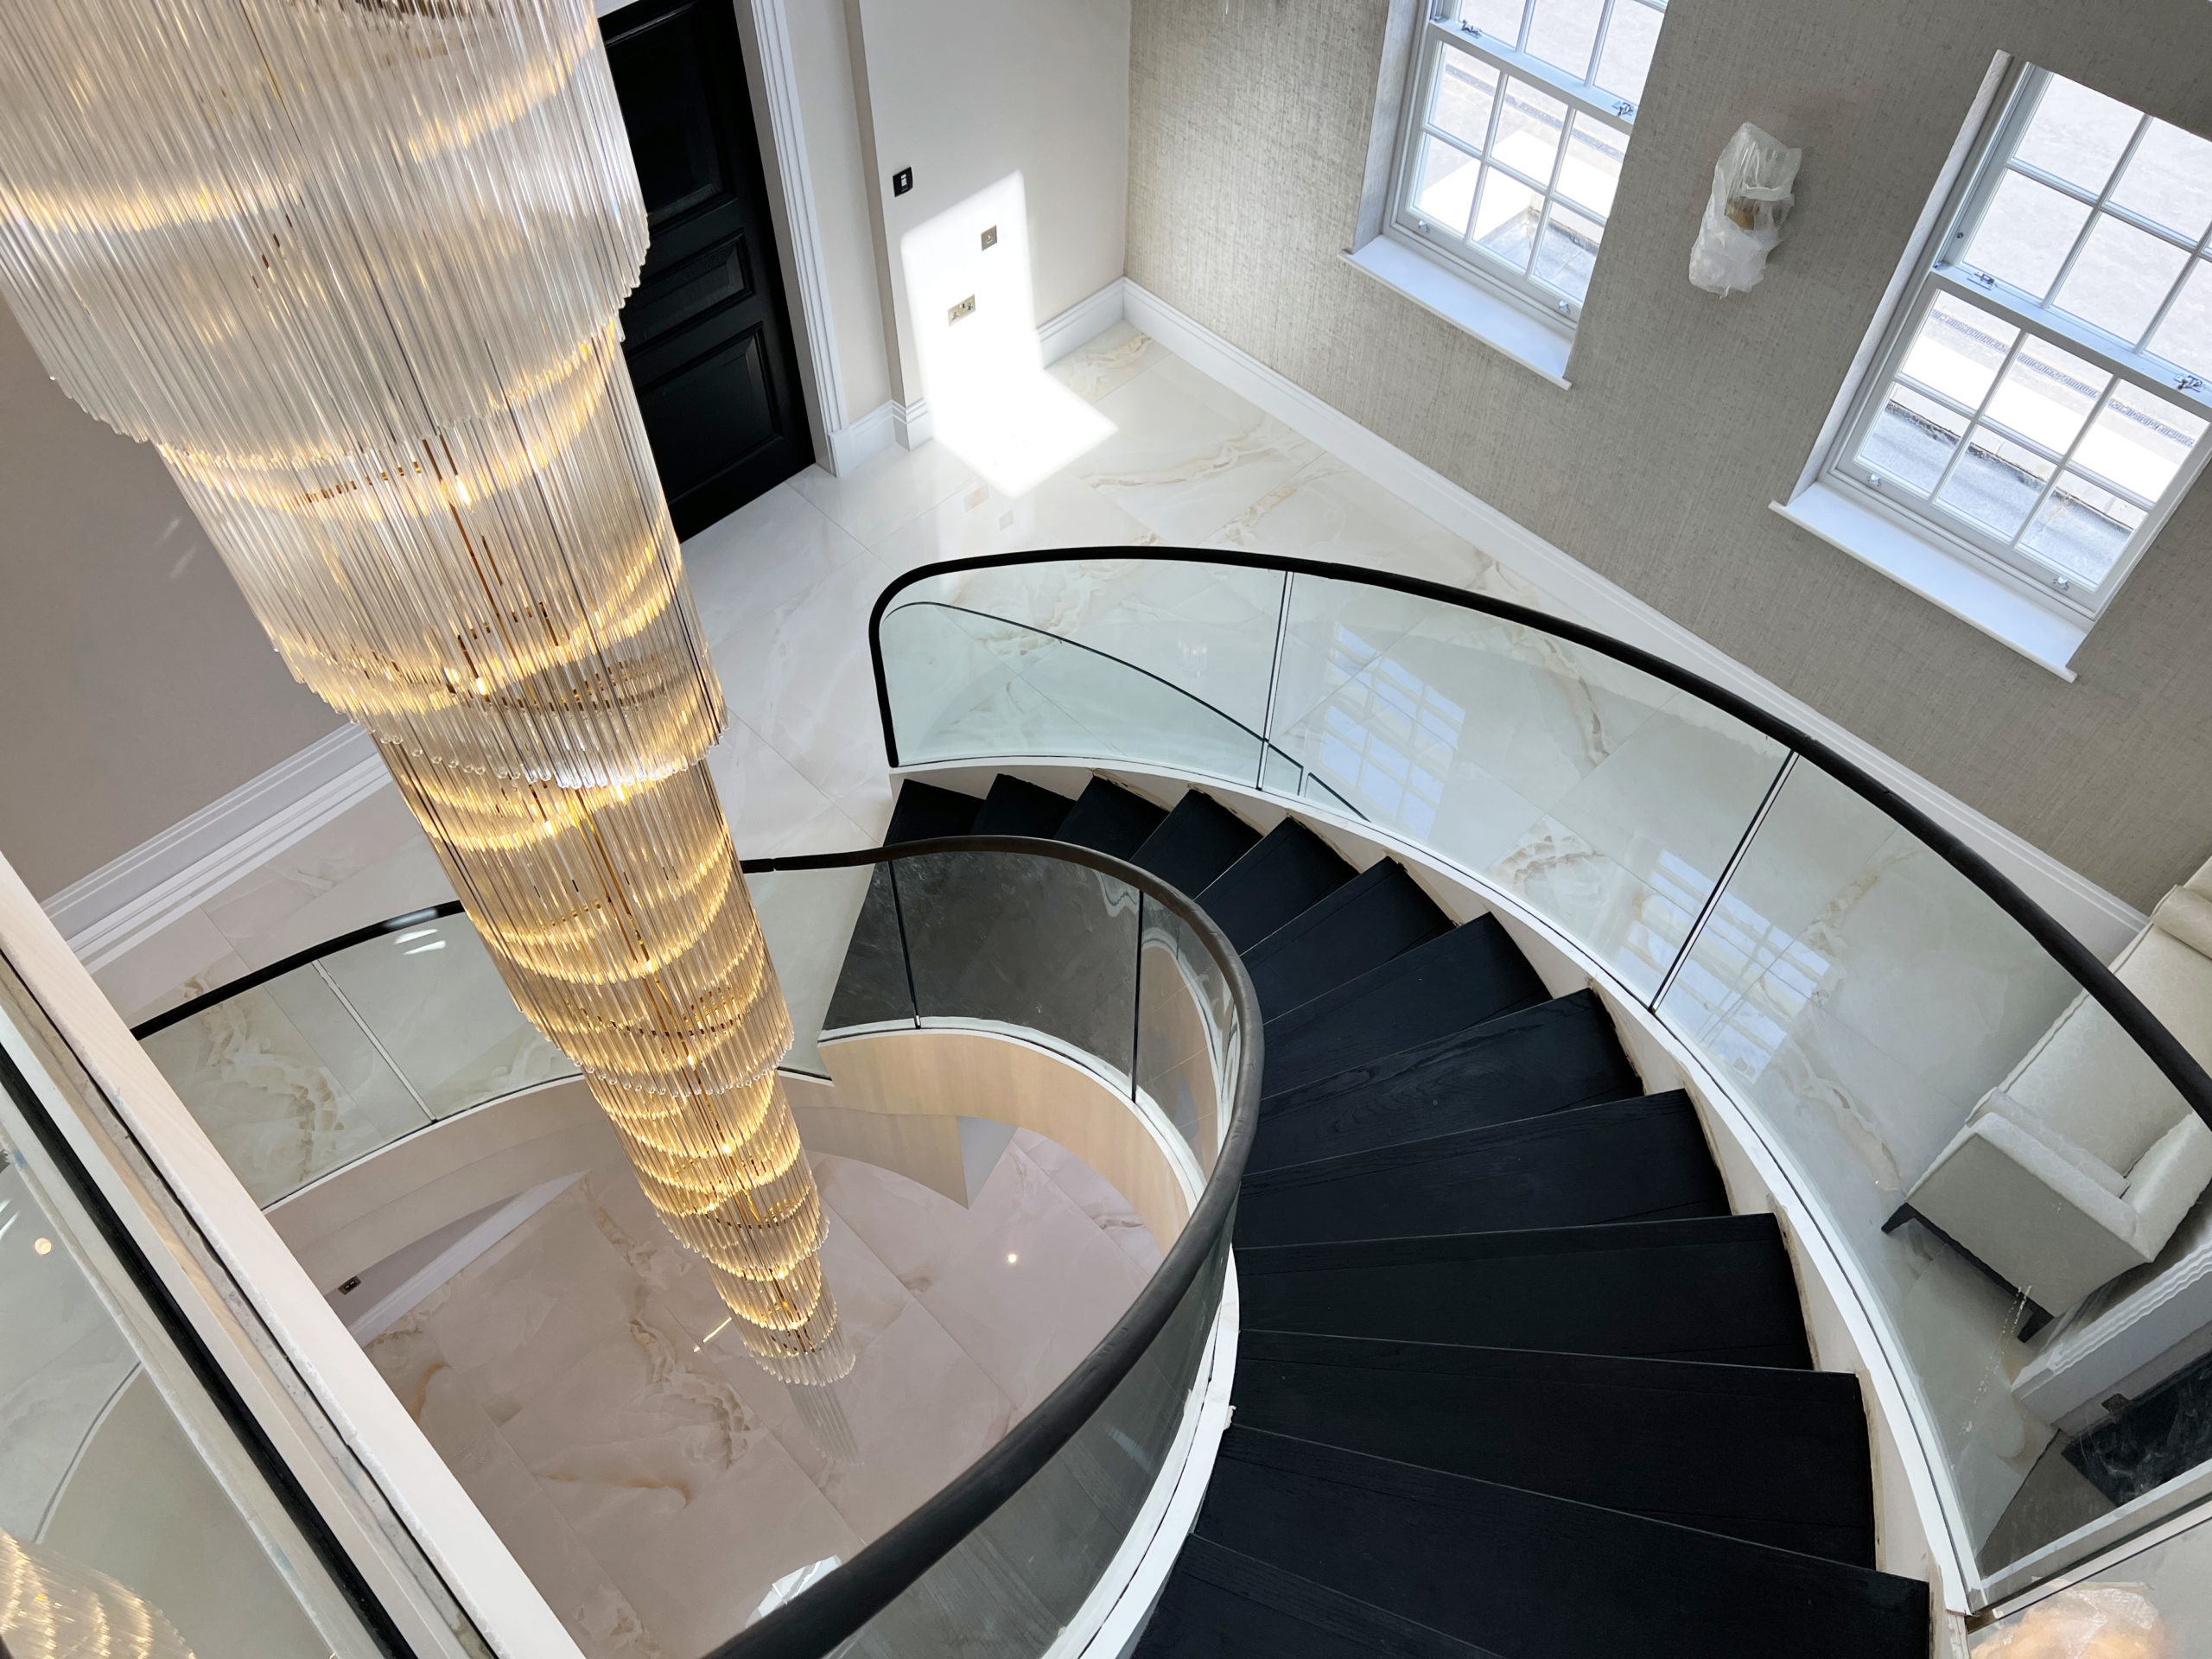 Helical staircase complemented with Curved glass balustrades, black oak steps & wooden handrail.